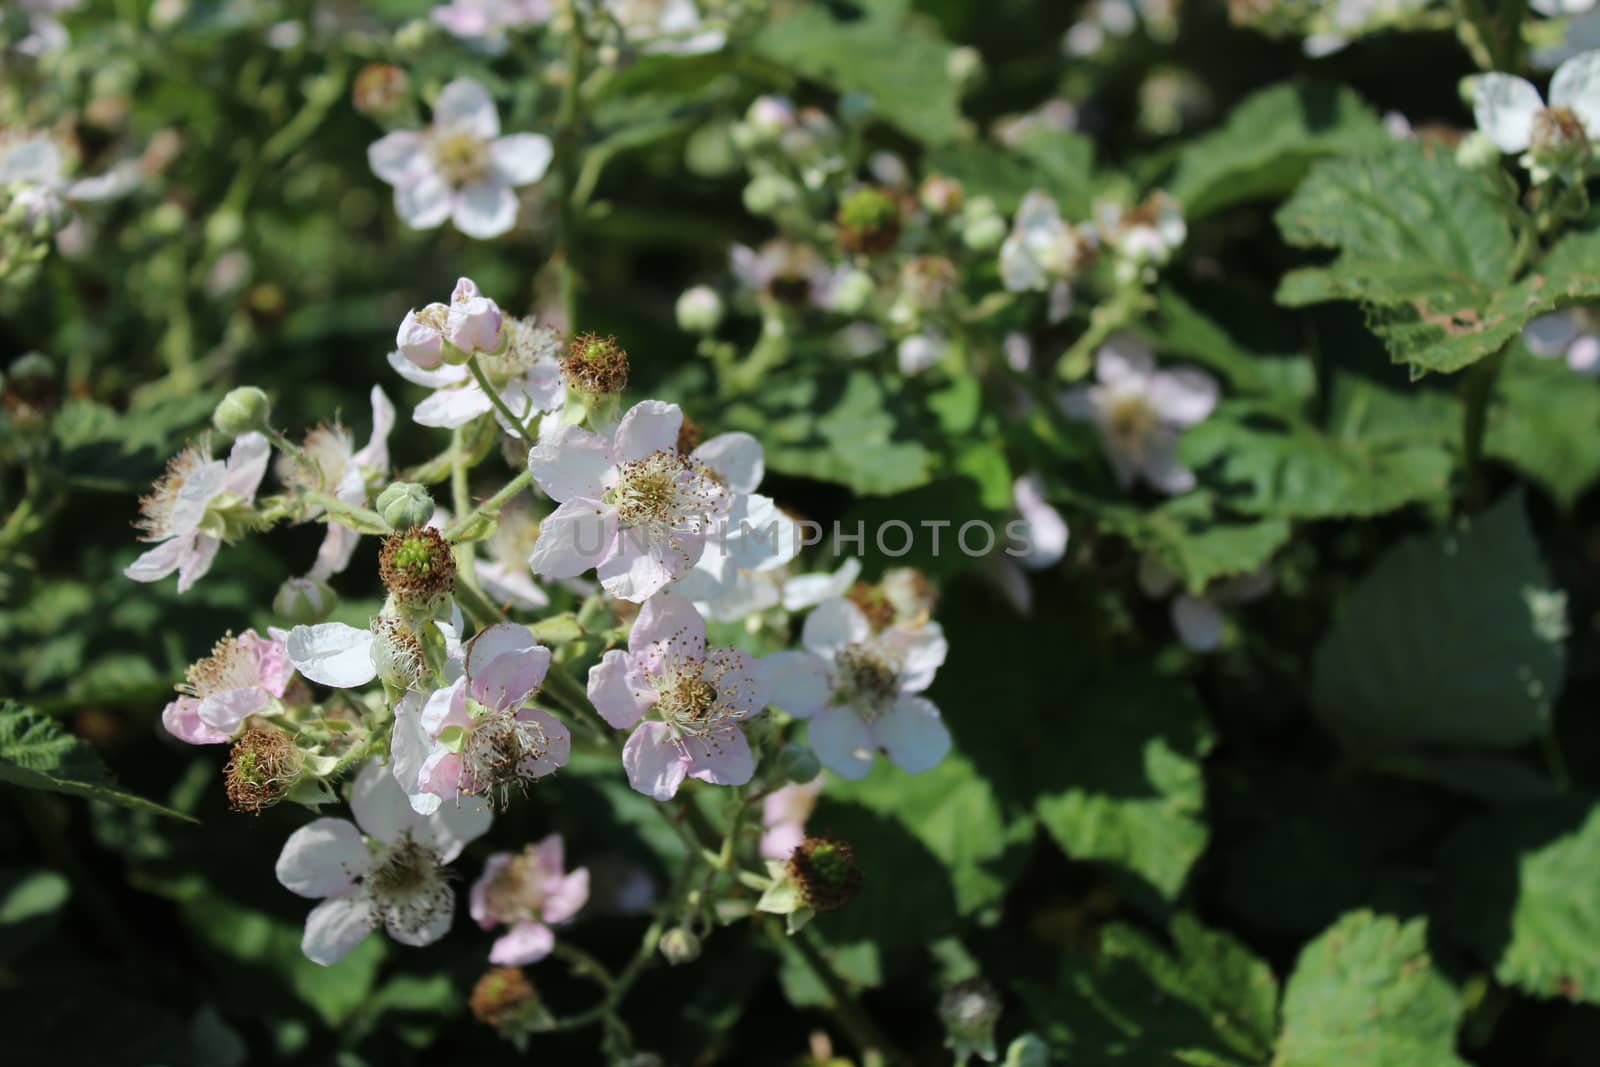 The picture shows blackberry bush with many blossoms